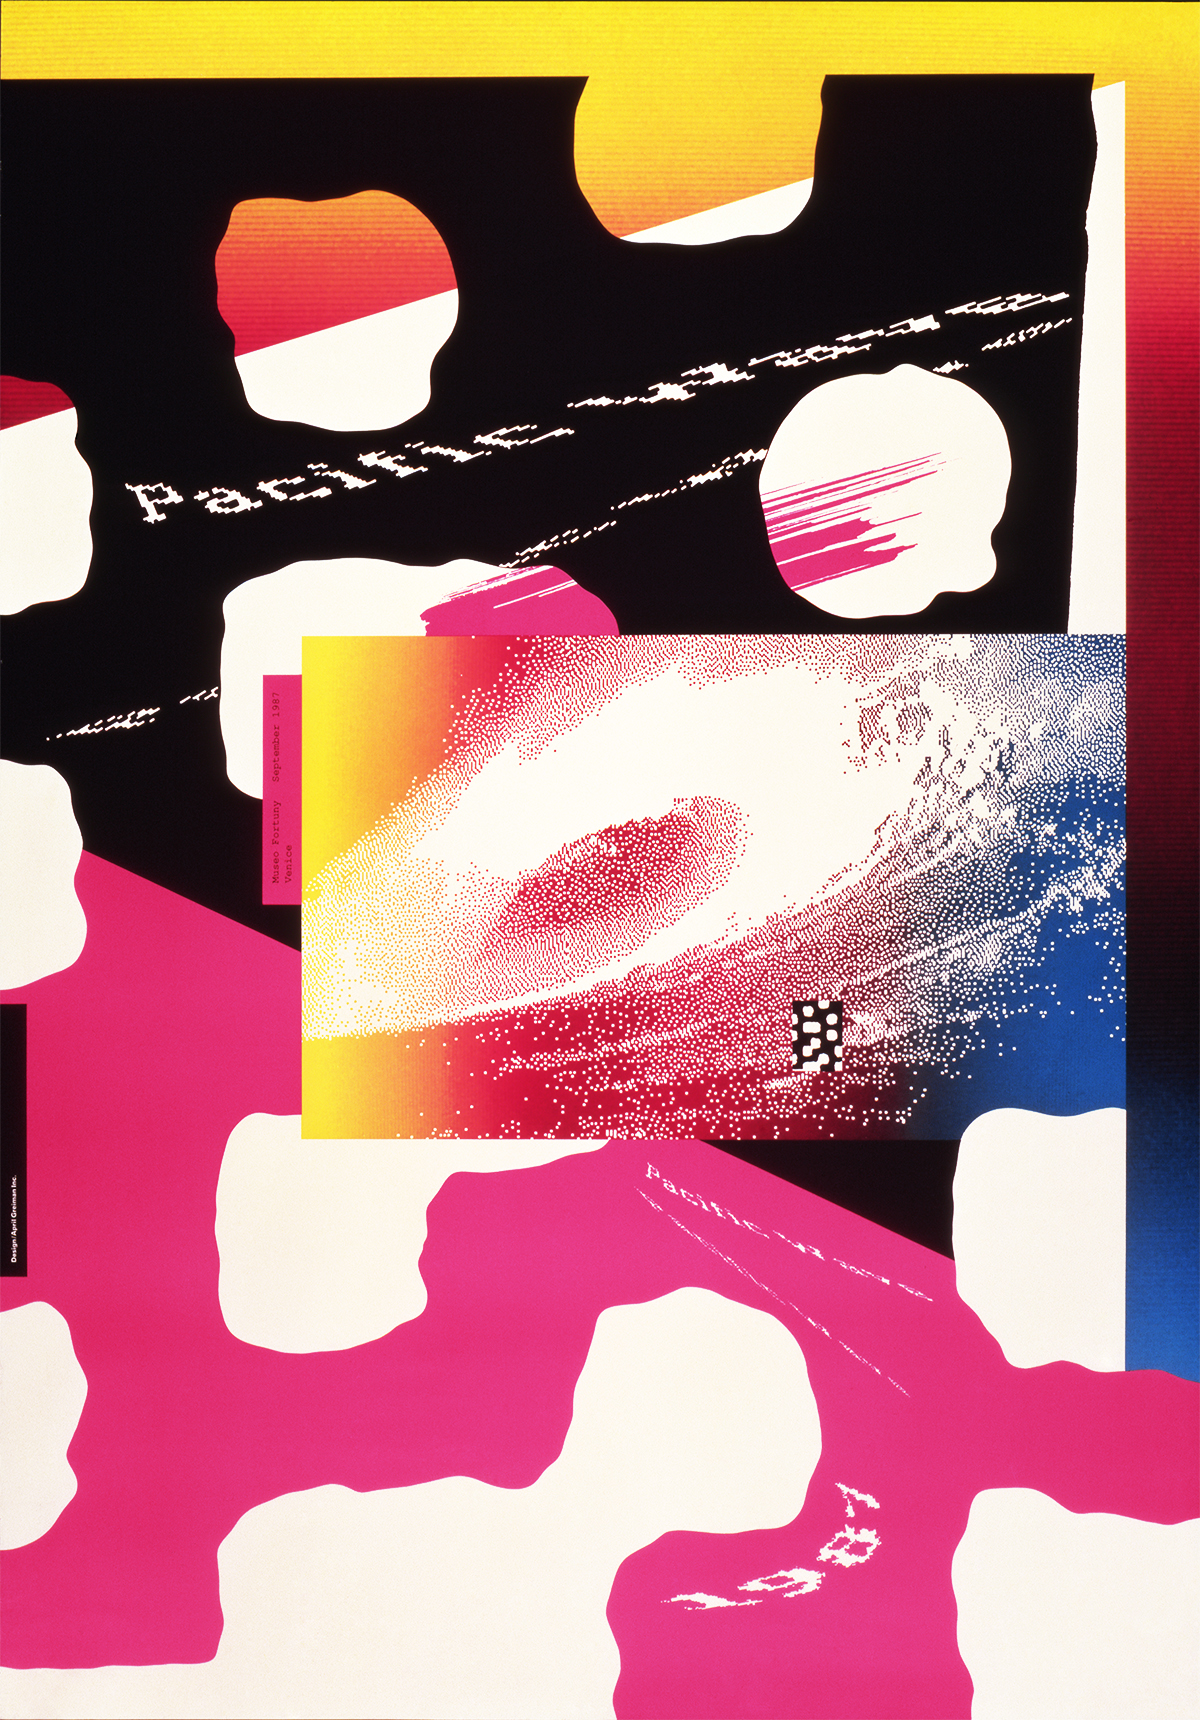 Cropped promotional poster for 'Pacific Wave' at Museo Fortung in Venice. Layering of irregular, flowing shapes with holes like surface of Swiss cheese in hot pink at top half and black at bottom half. At top “Pacific Wave” (in white) in ascending diagonal on pink background and same text repeated below in descending diagonal on black background. Border in shape of right triangle along top edge in color gradation from yellow at top to orange and then red. One and half inch border with same color gradation along right edge except near bottom with same color gradation. Large rectangle at center to right edge layered on top with image of galaxy with shape of Milky Way (in white) and universe (in maroon, yellow, blue). Another small box superimposed with black with irregular shaped holes like Swiss cheese. Vertical pink box along right side of box with image of galaxy.